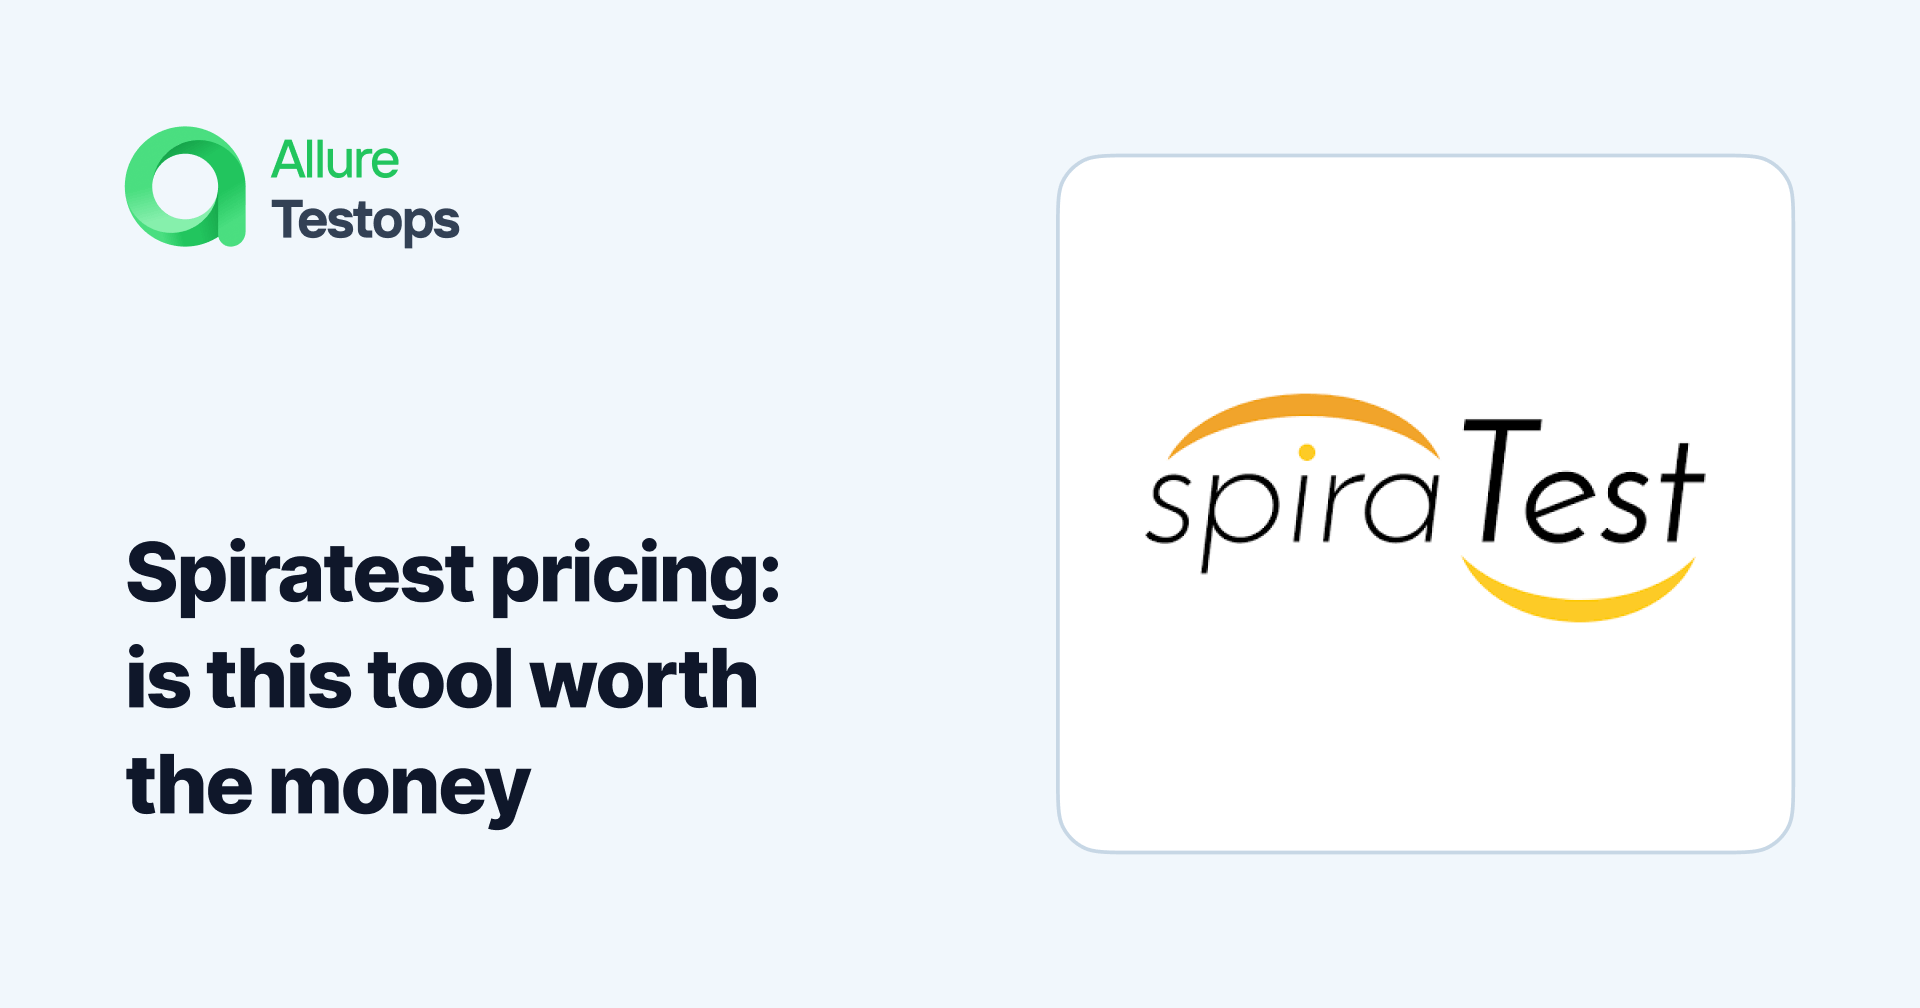 Spiratest pricing: is this tool worth the money